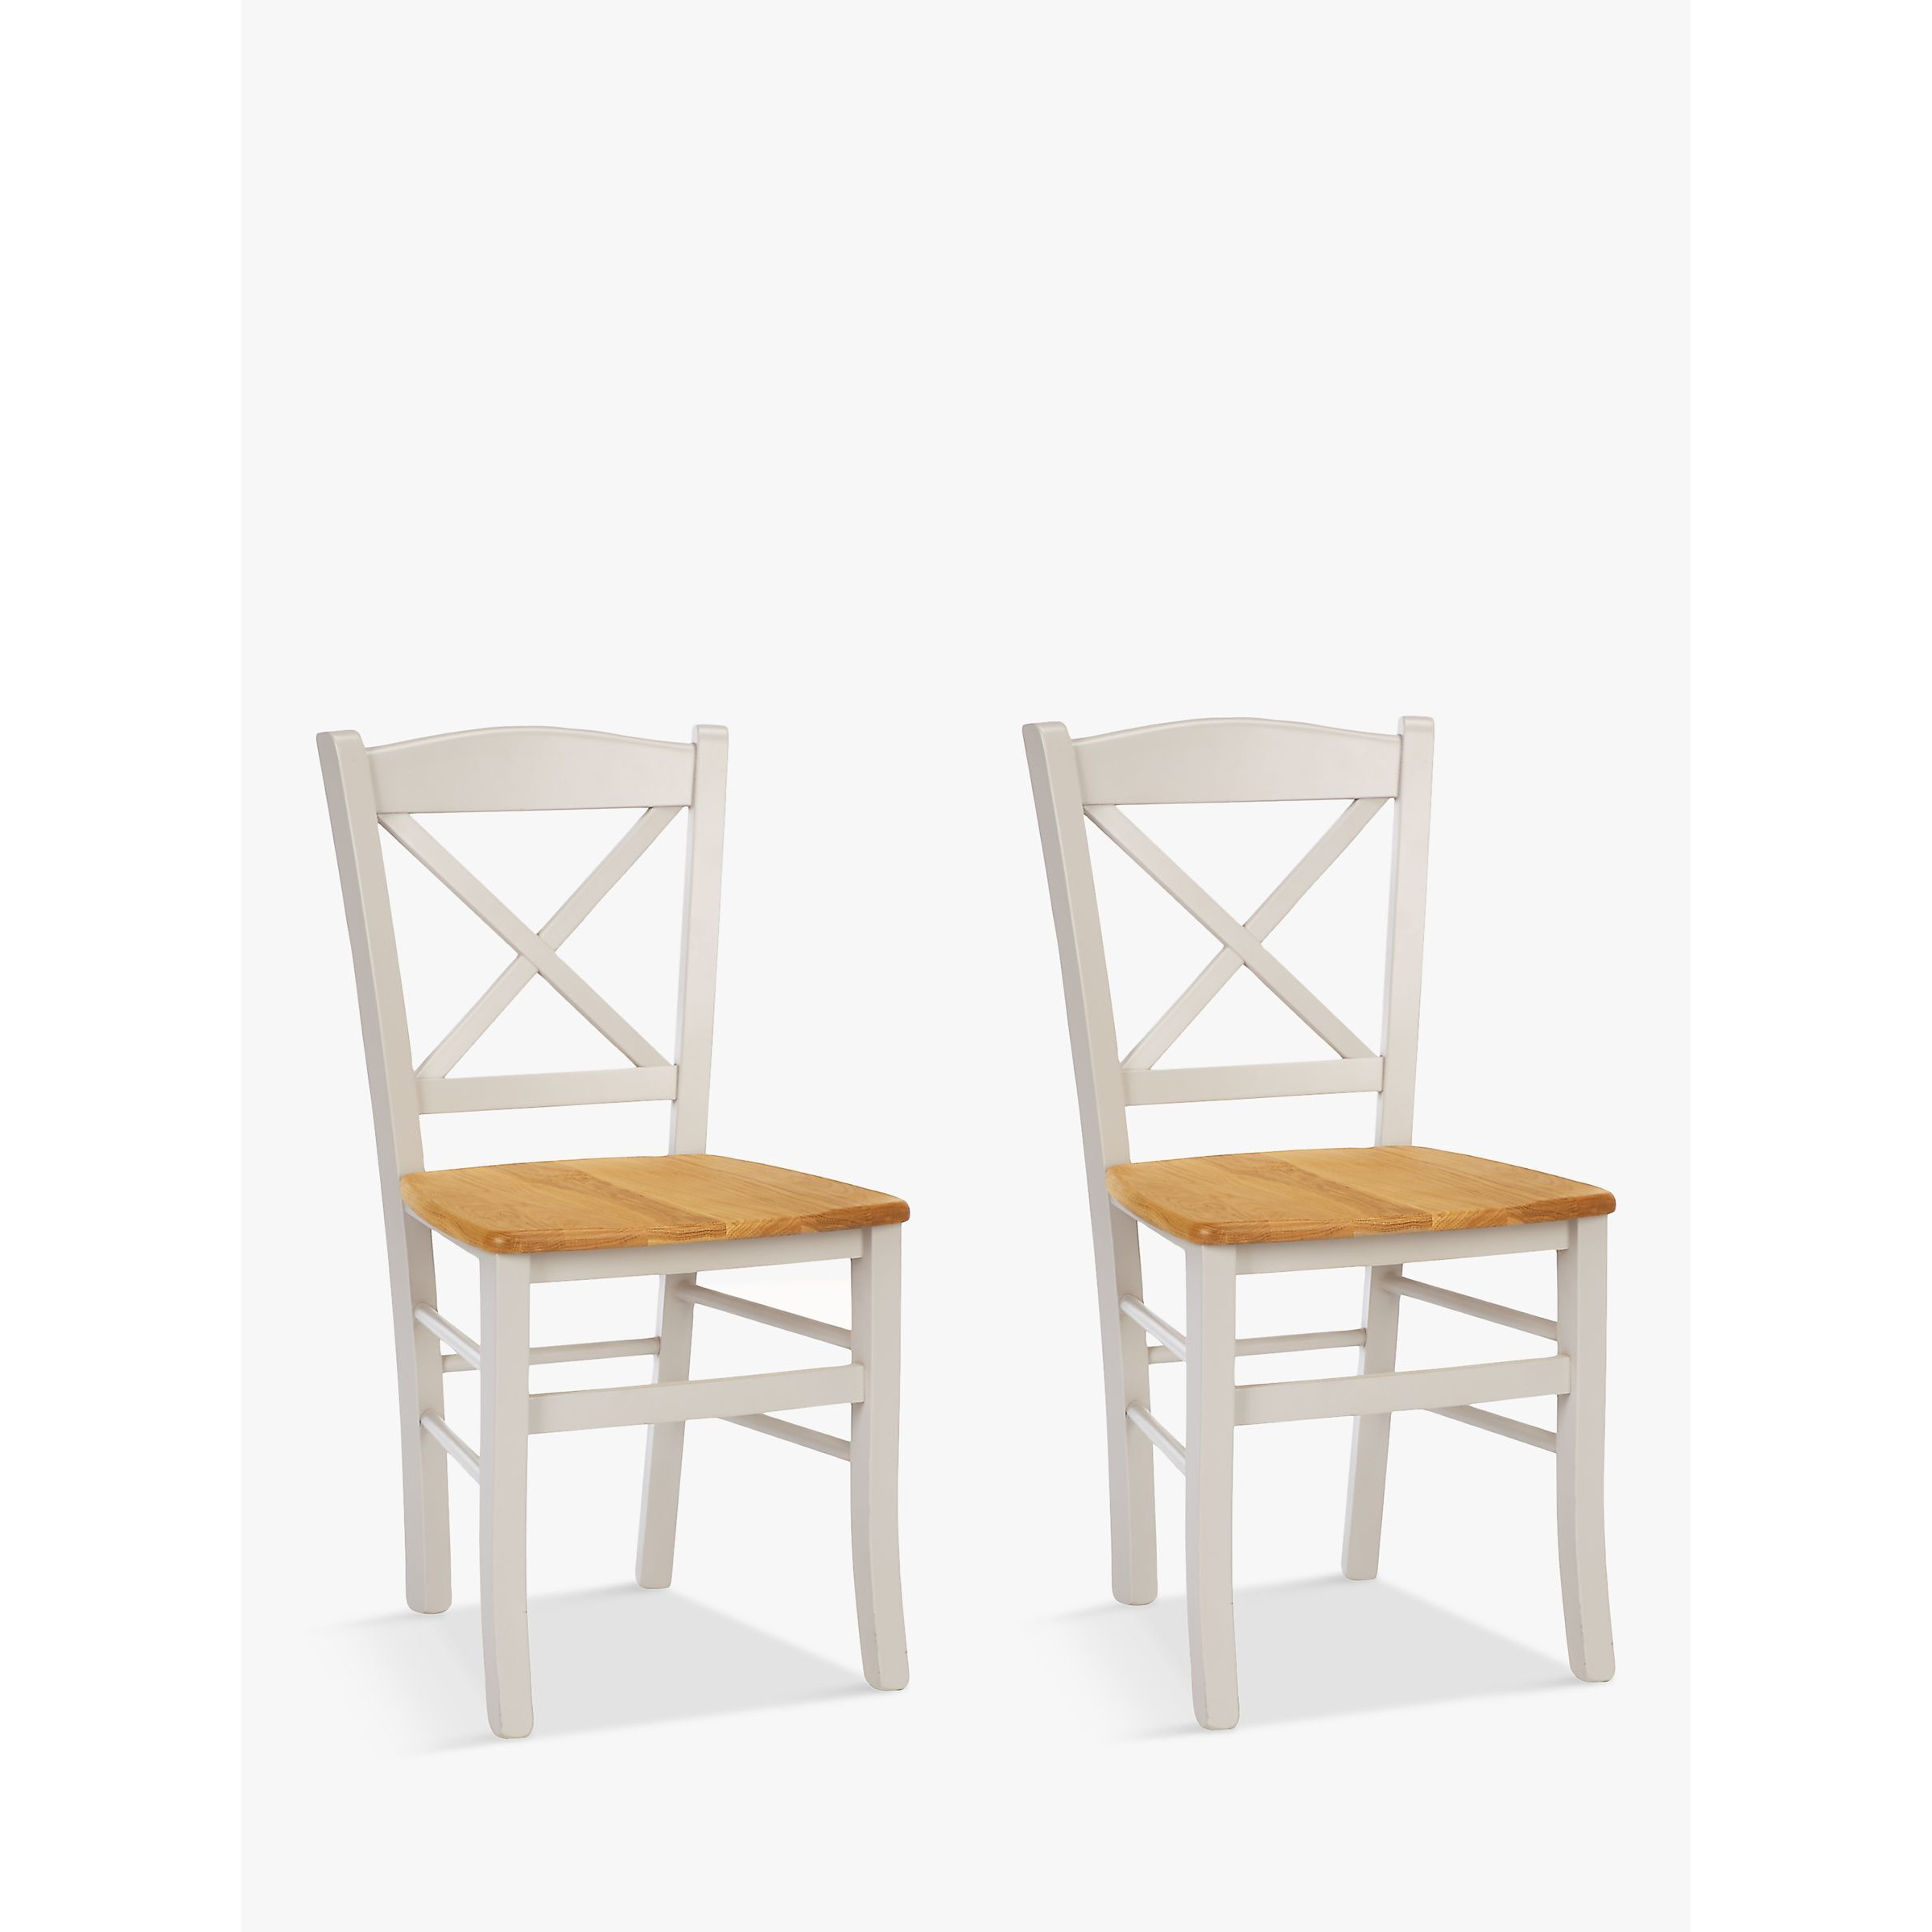 John Lewis ANYDAY Clayton Beech Wood Dining Chairs, Set of 2 - image 1